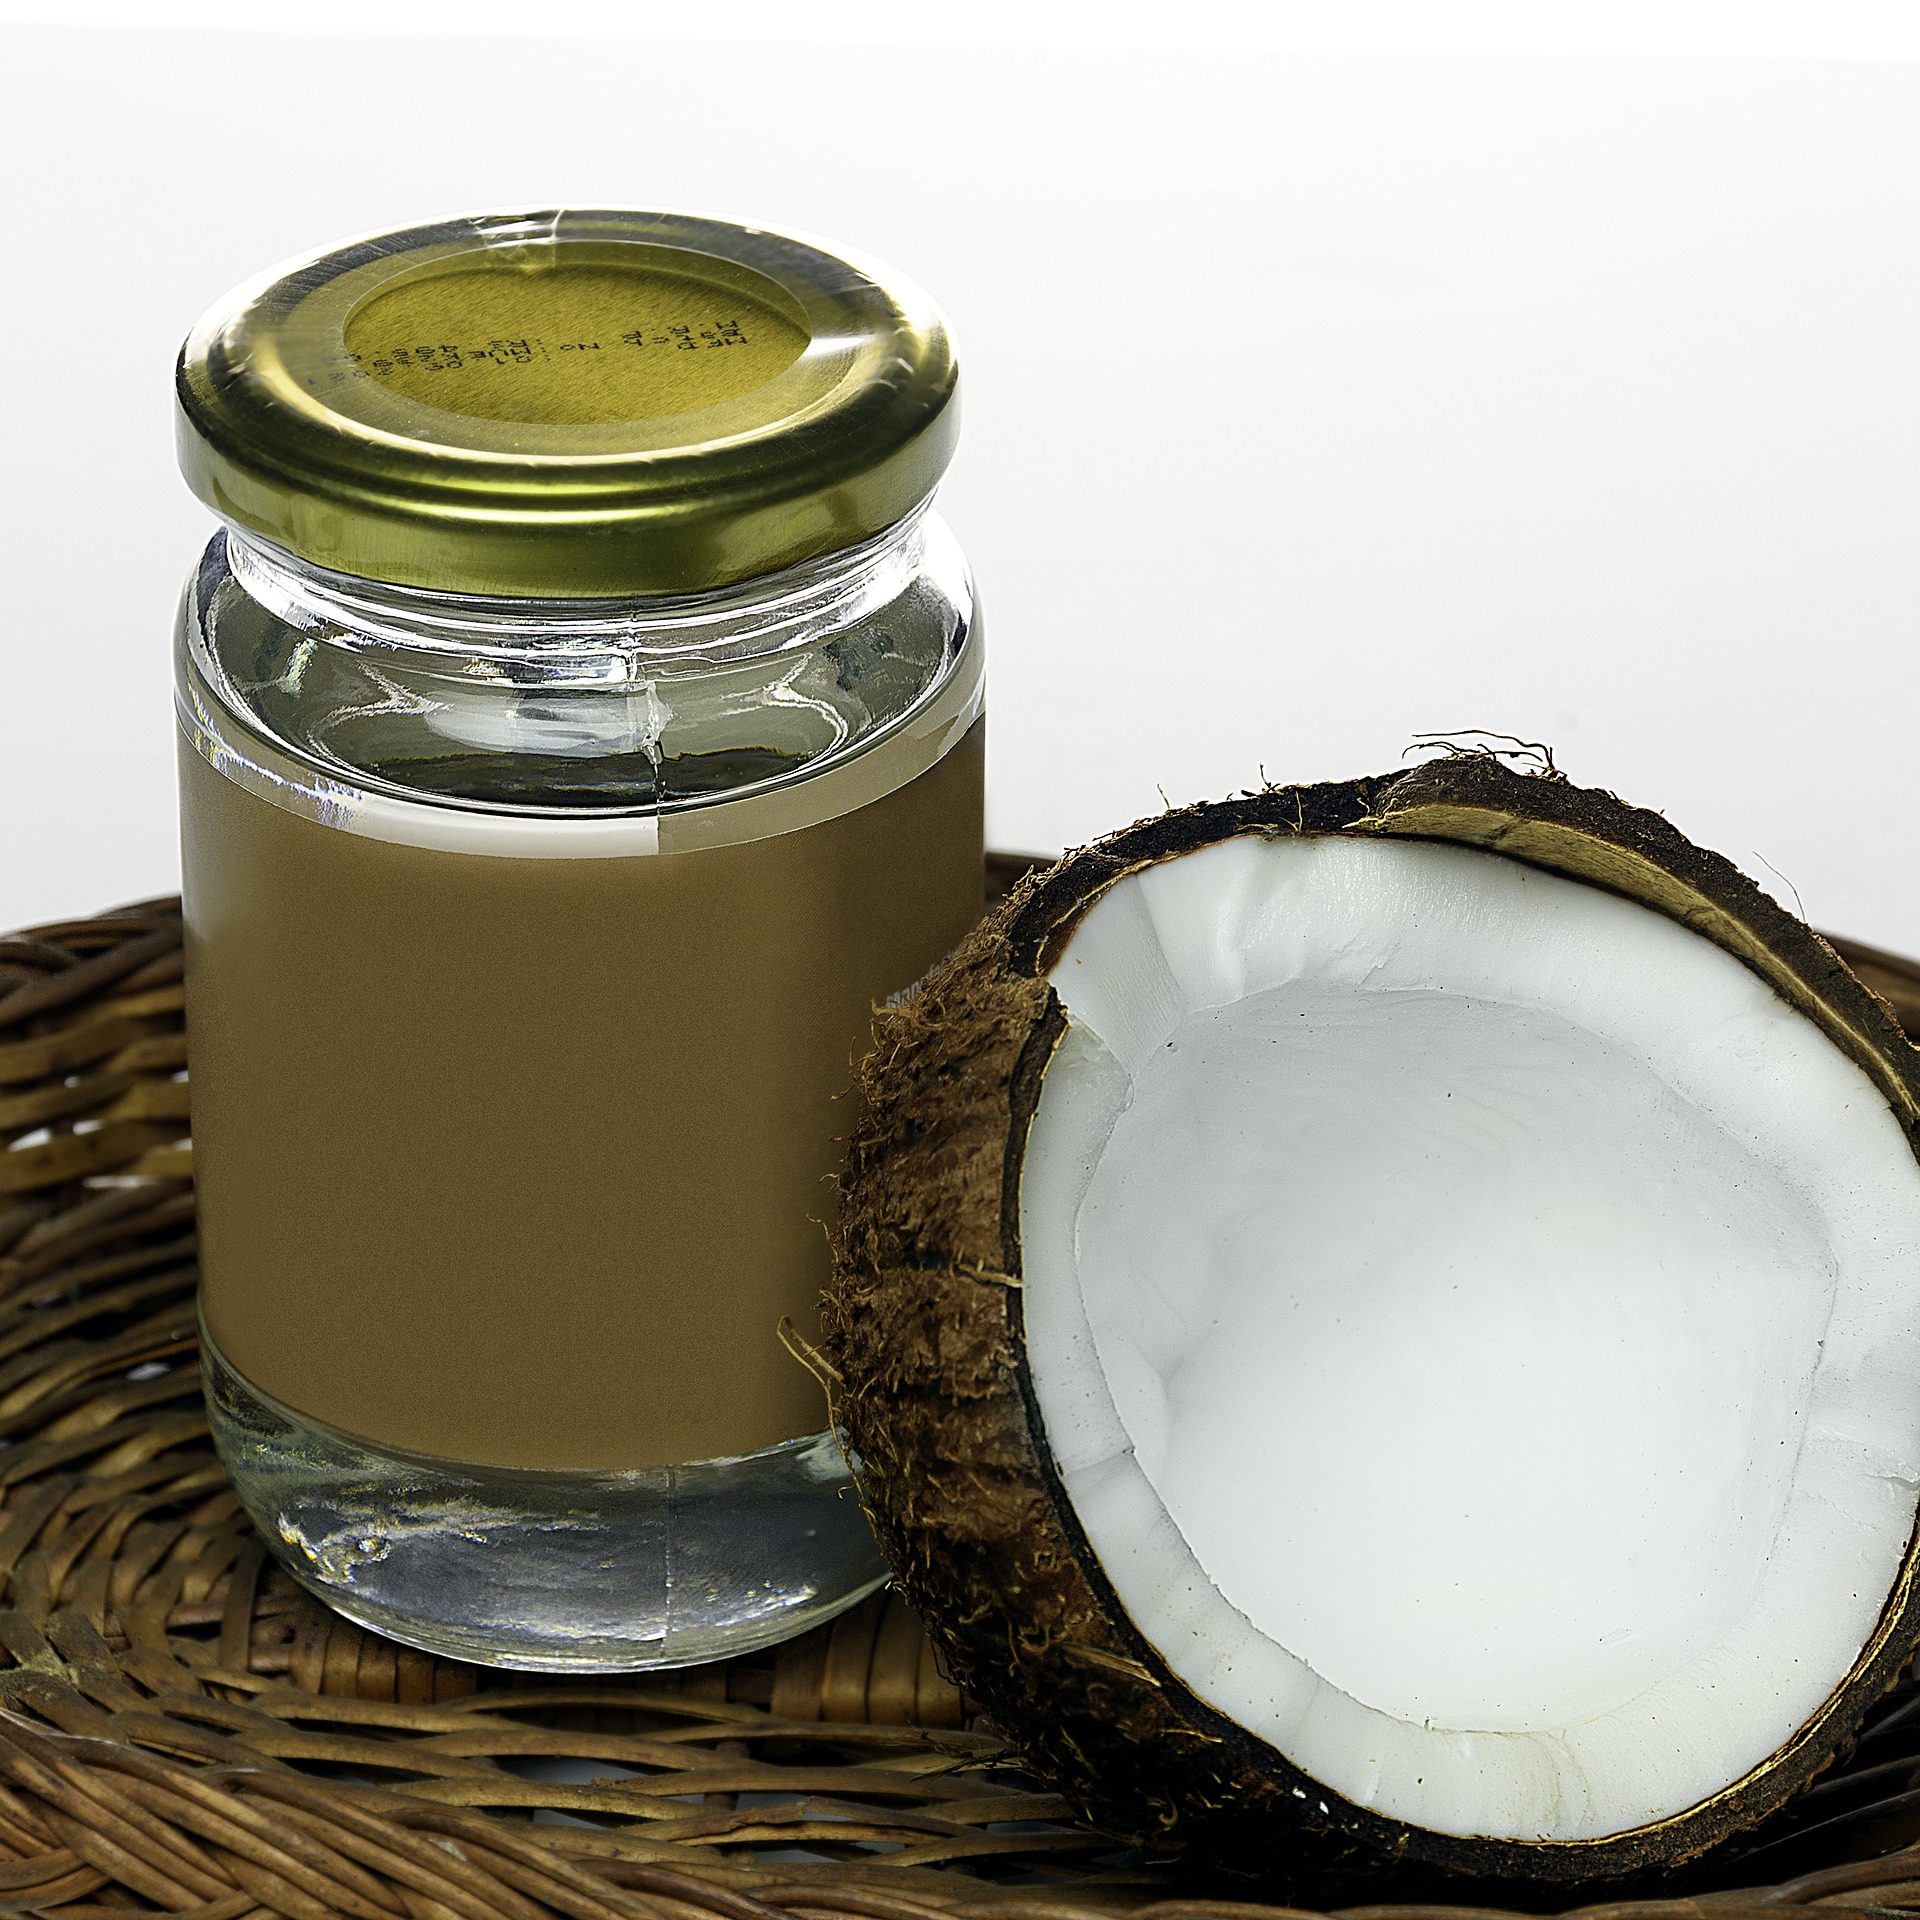 Does coconut oil go bad if not refrigerated